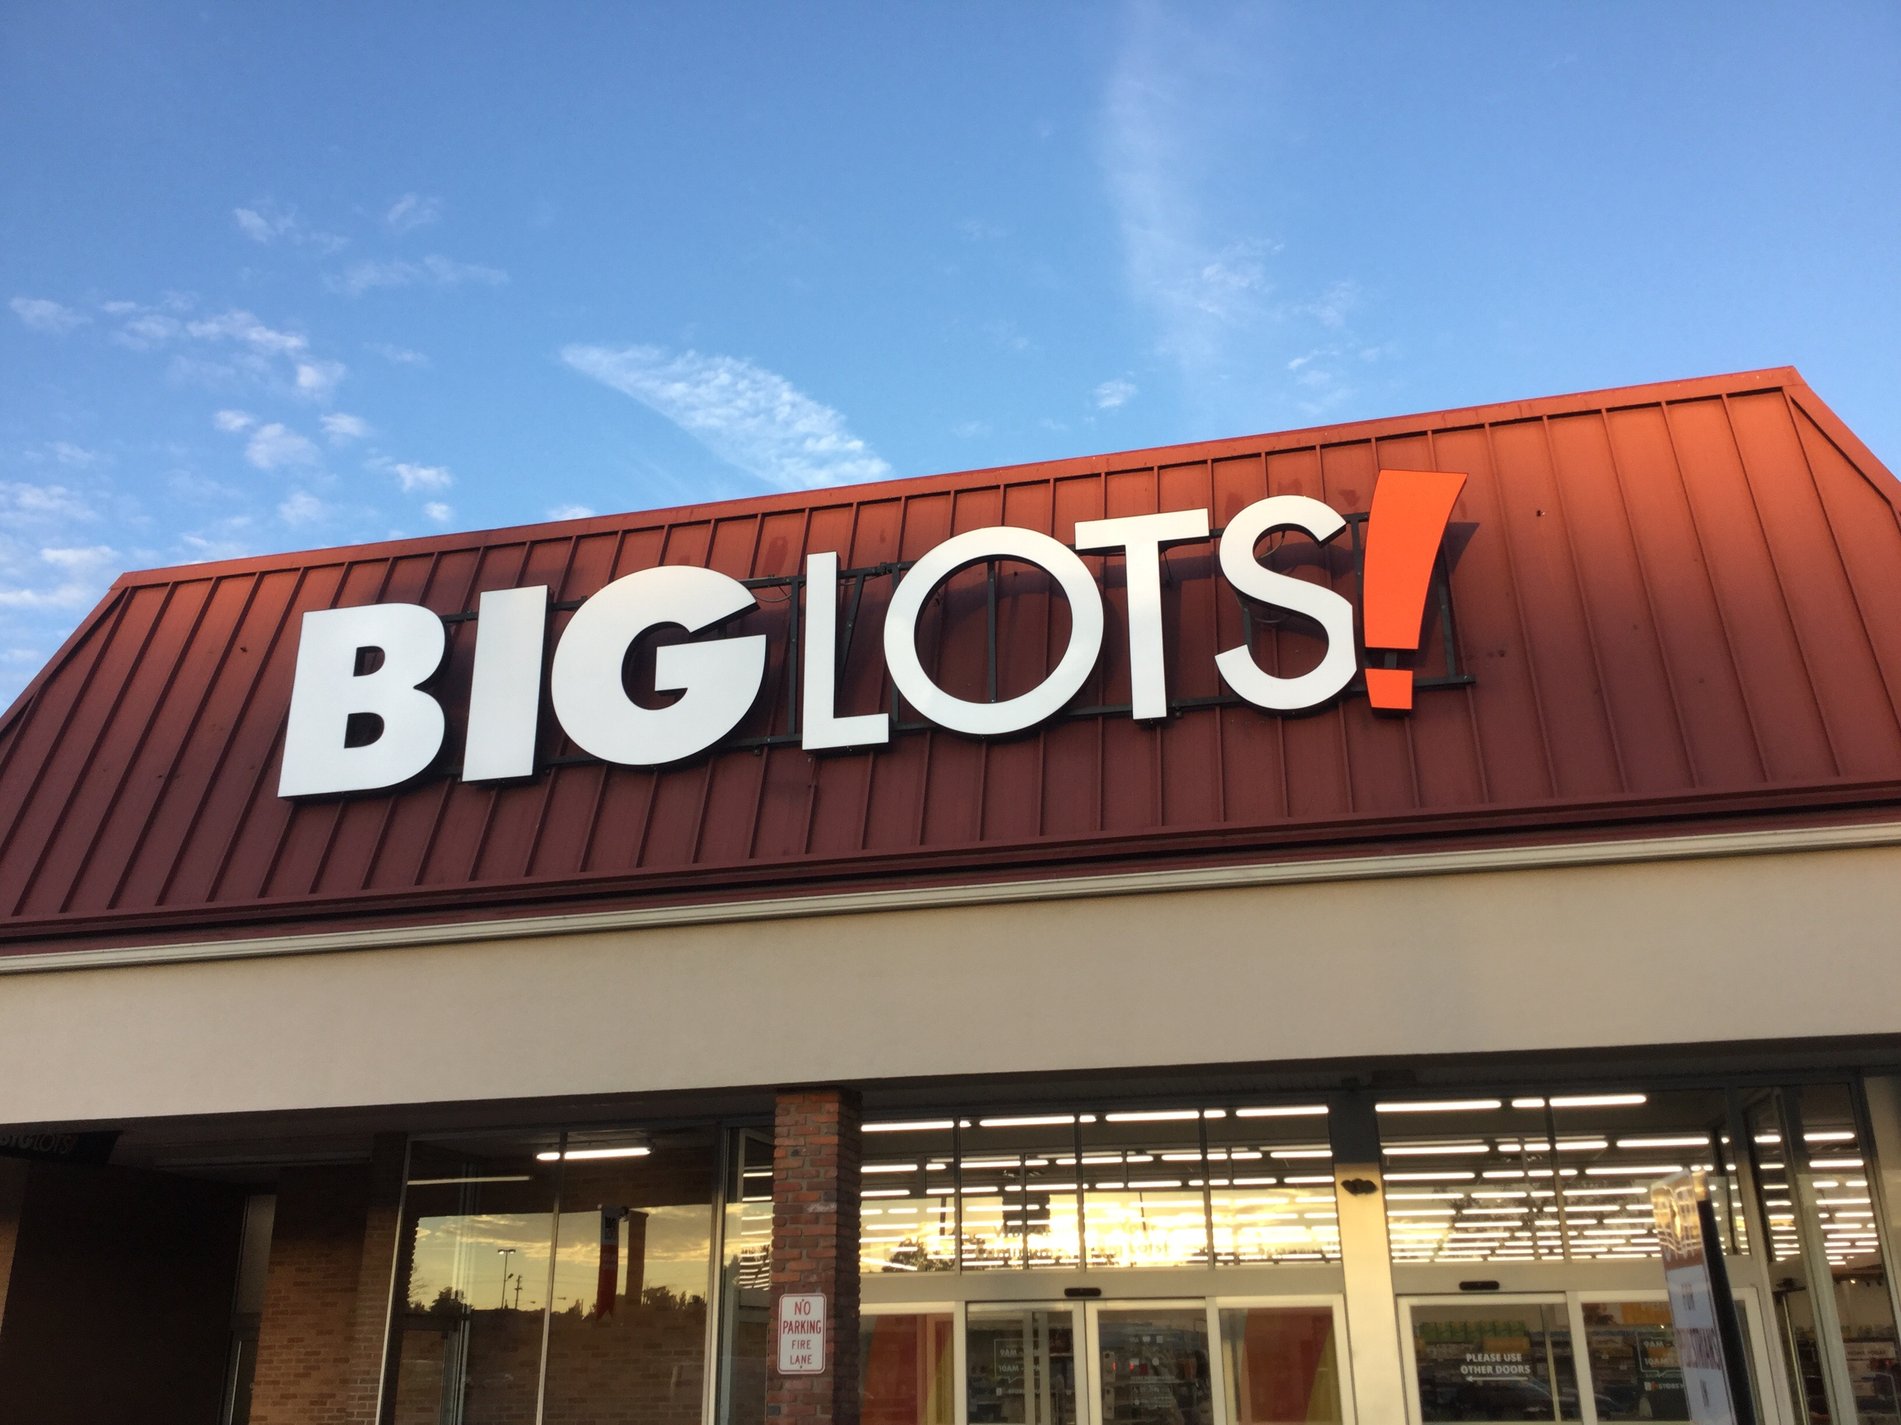 Visit the Big Lots in Parma, OH, Located on 7512 Broadview Rd